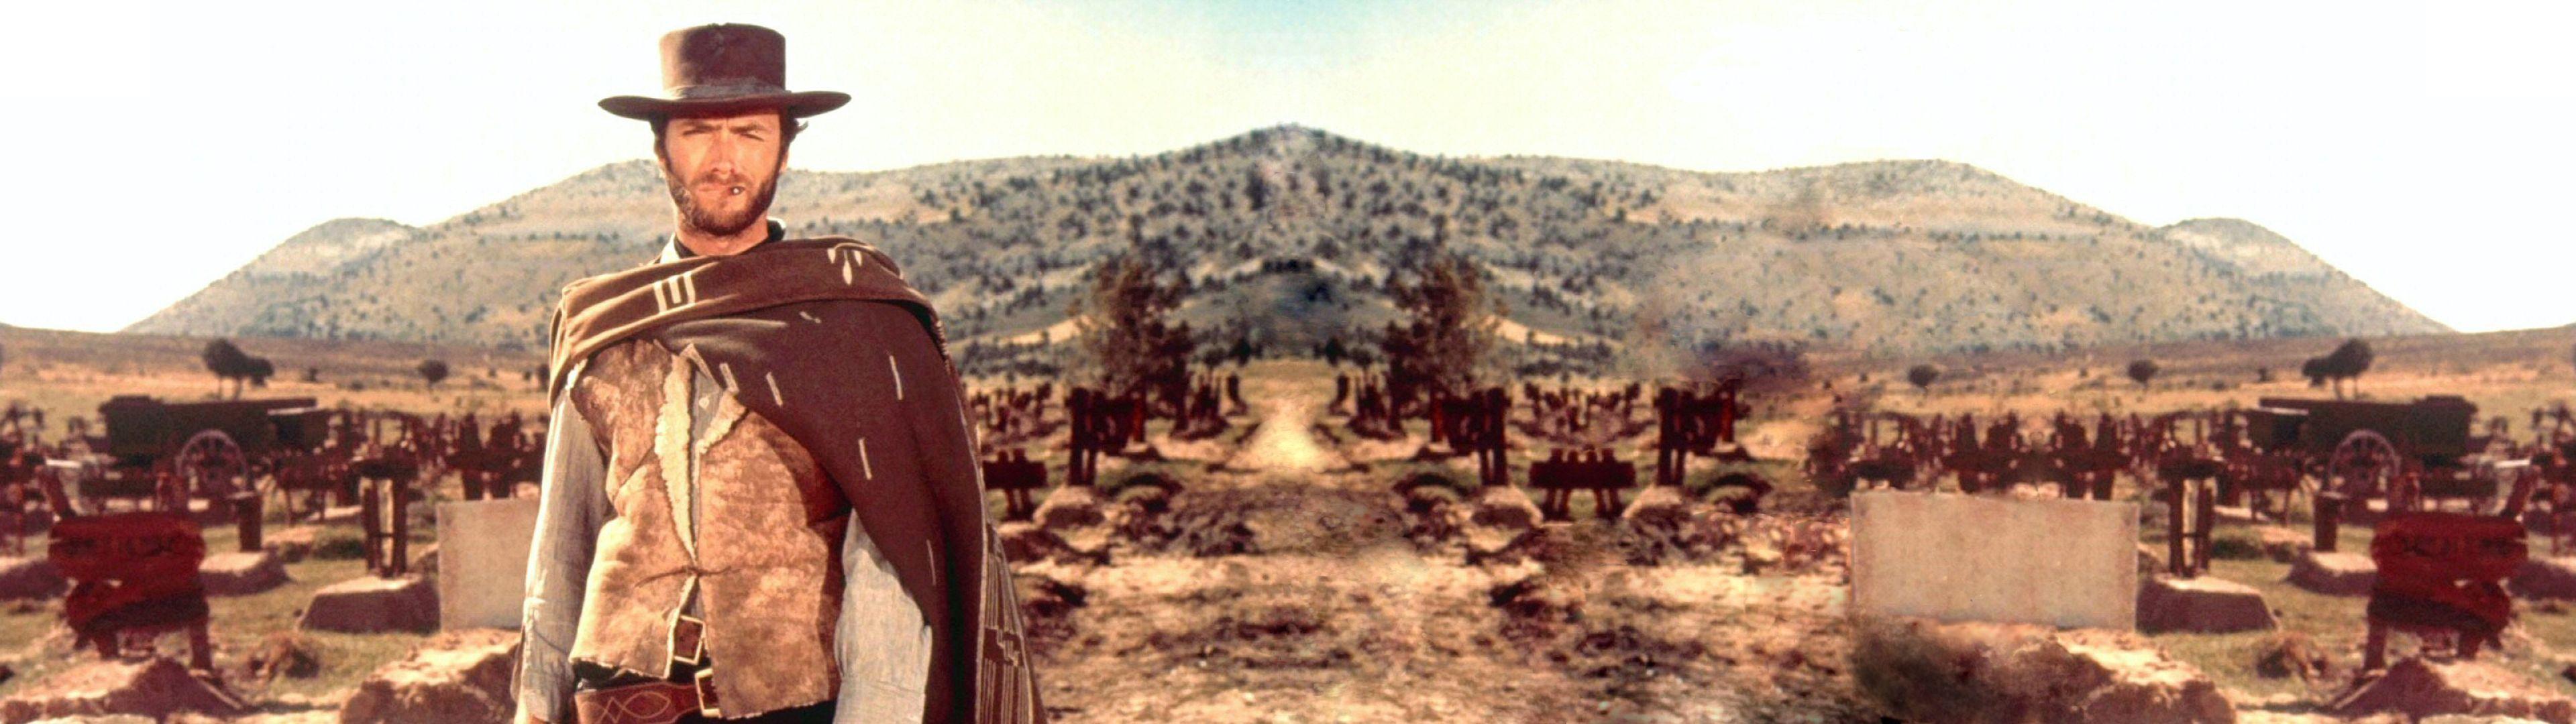 The Good The Bad And The Ugly Dual Screen Wallpapers.